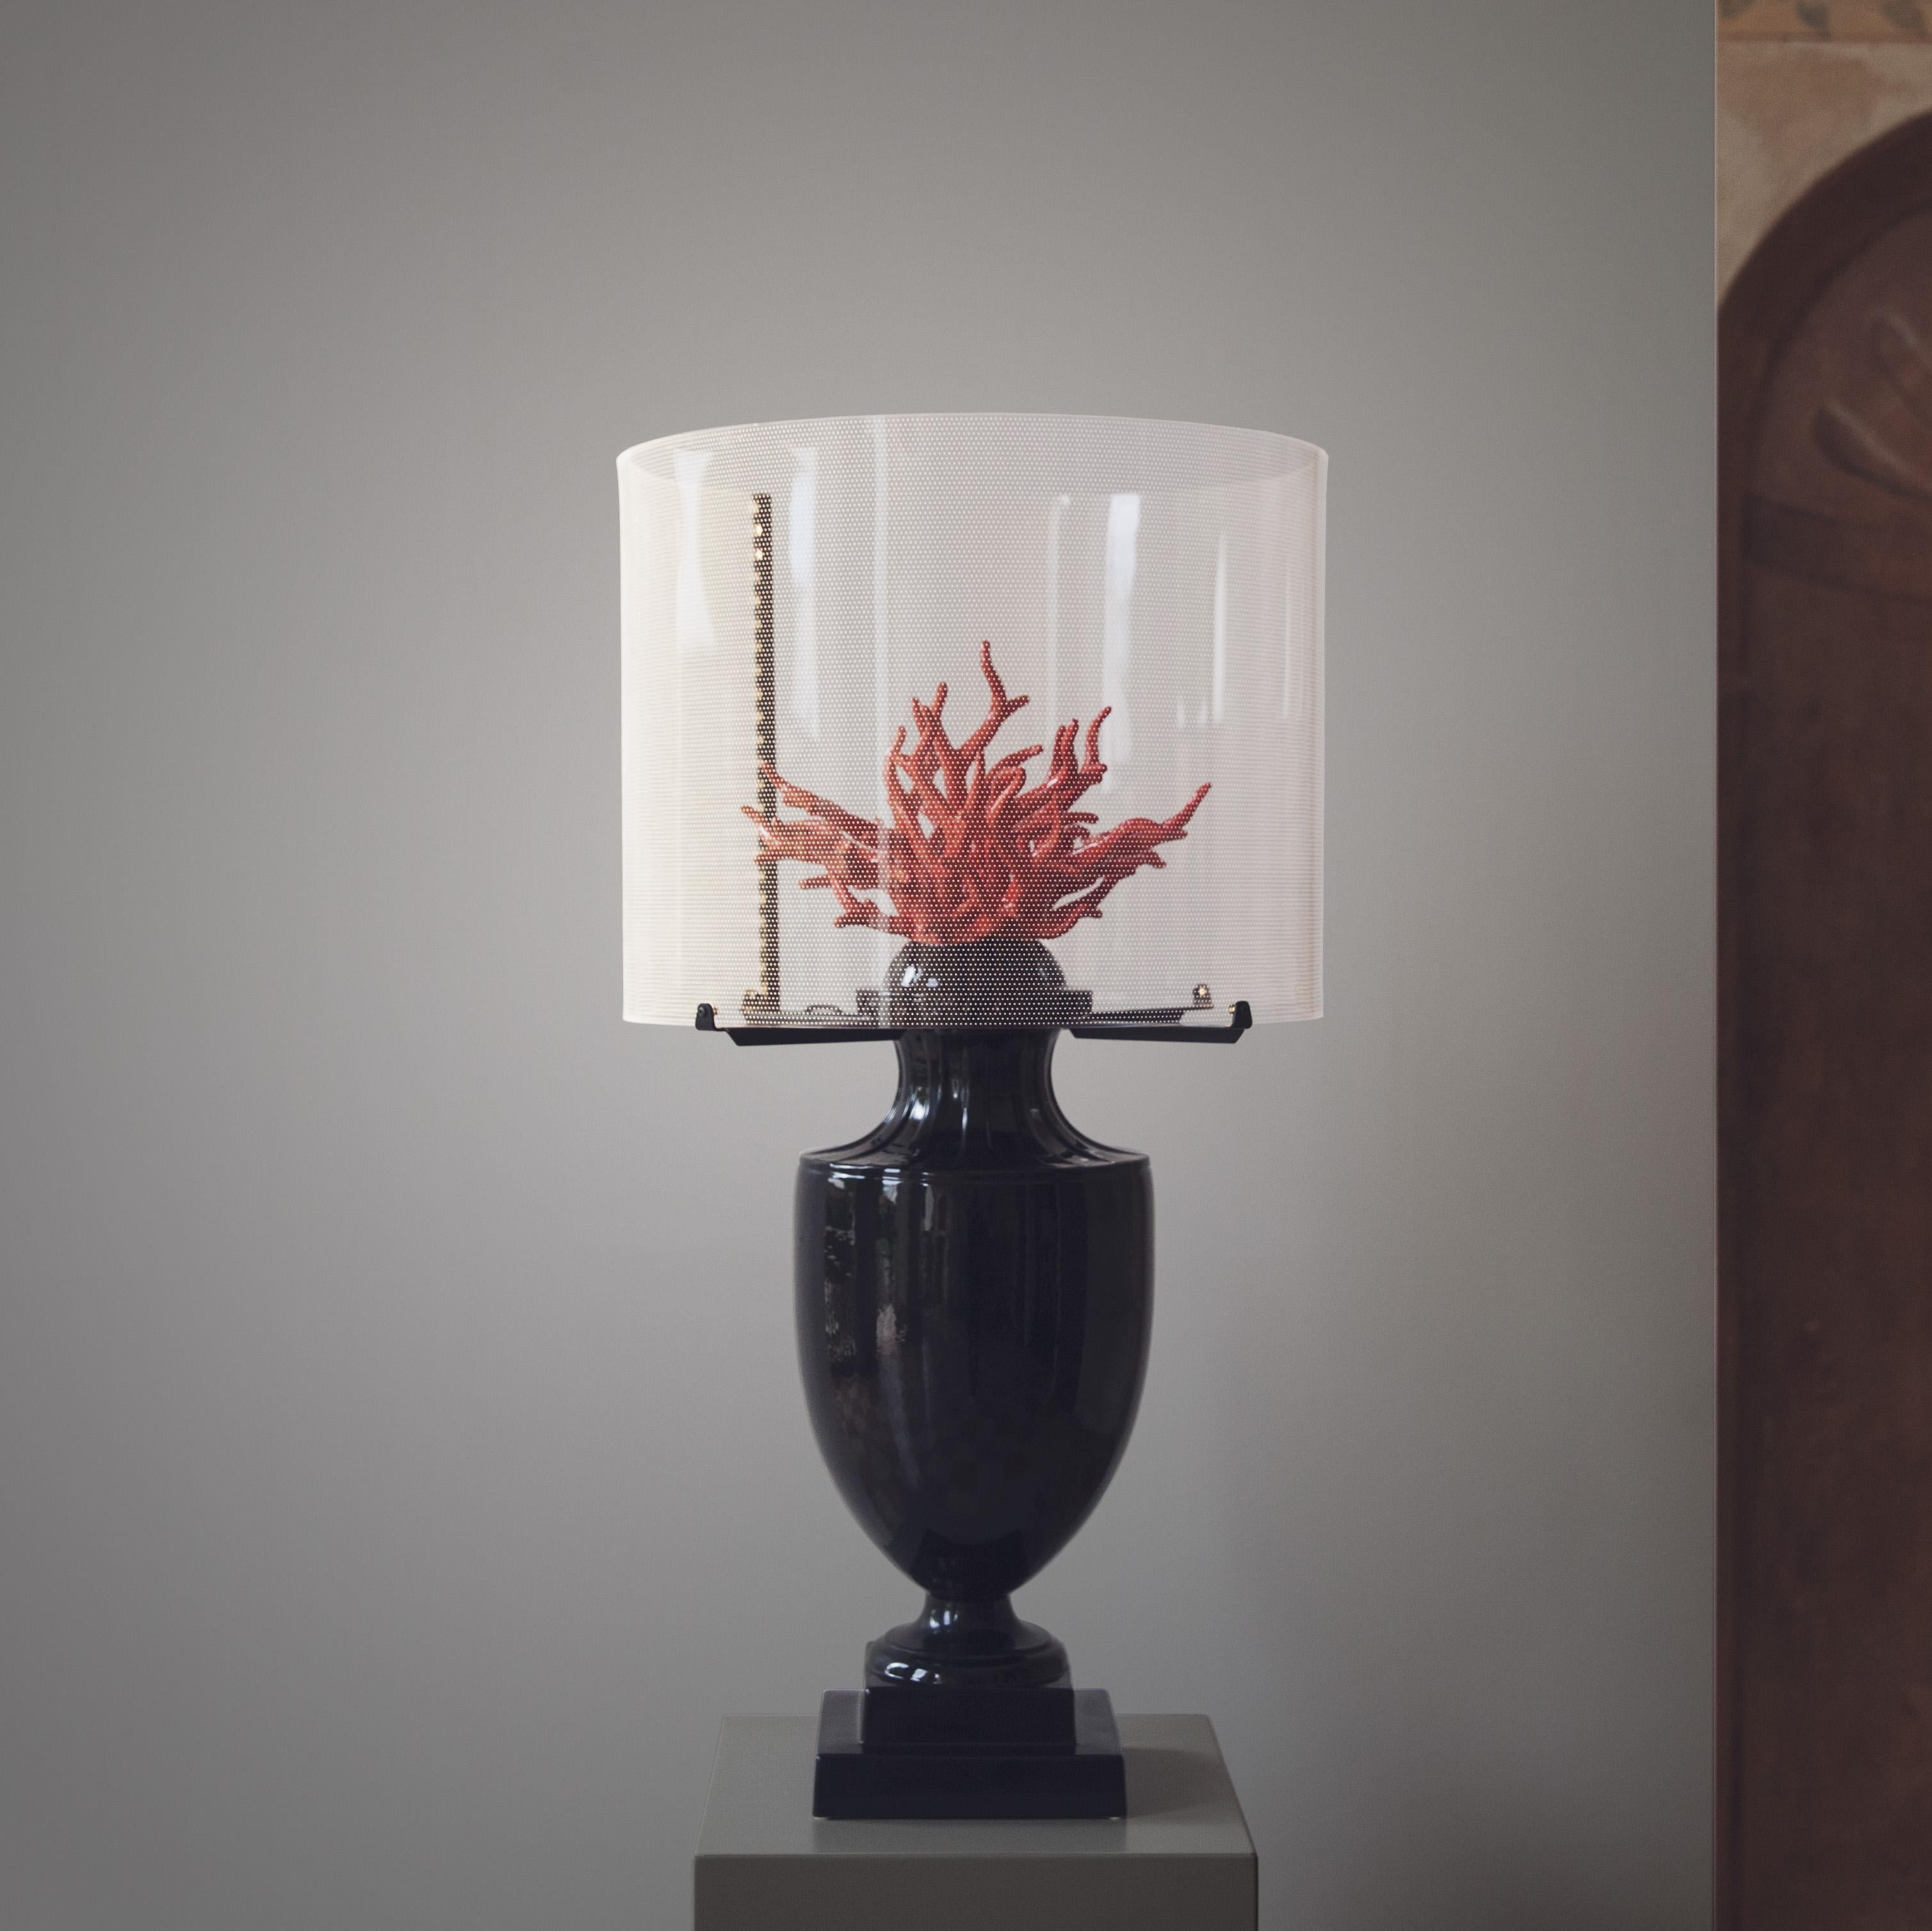 This sumptuous art décor table lamp belongs to the Coralli collection designed by Massimo Marcomini, entirely handmade in Italy from superior ceramic in the Venetian tradition. The amphora-shaped pedestal offers an intriguing contrast to the